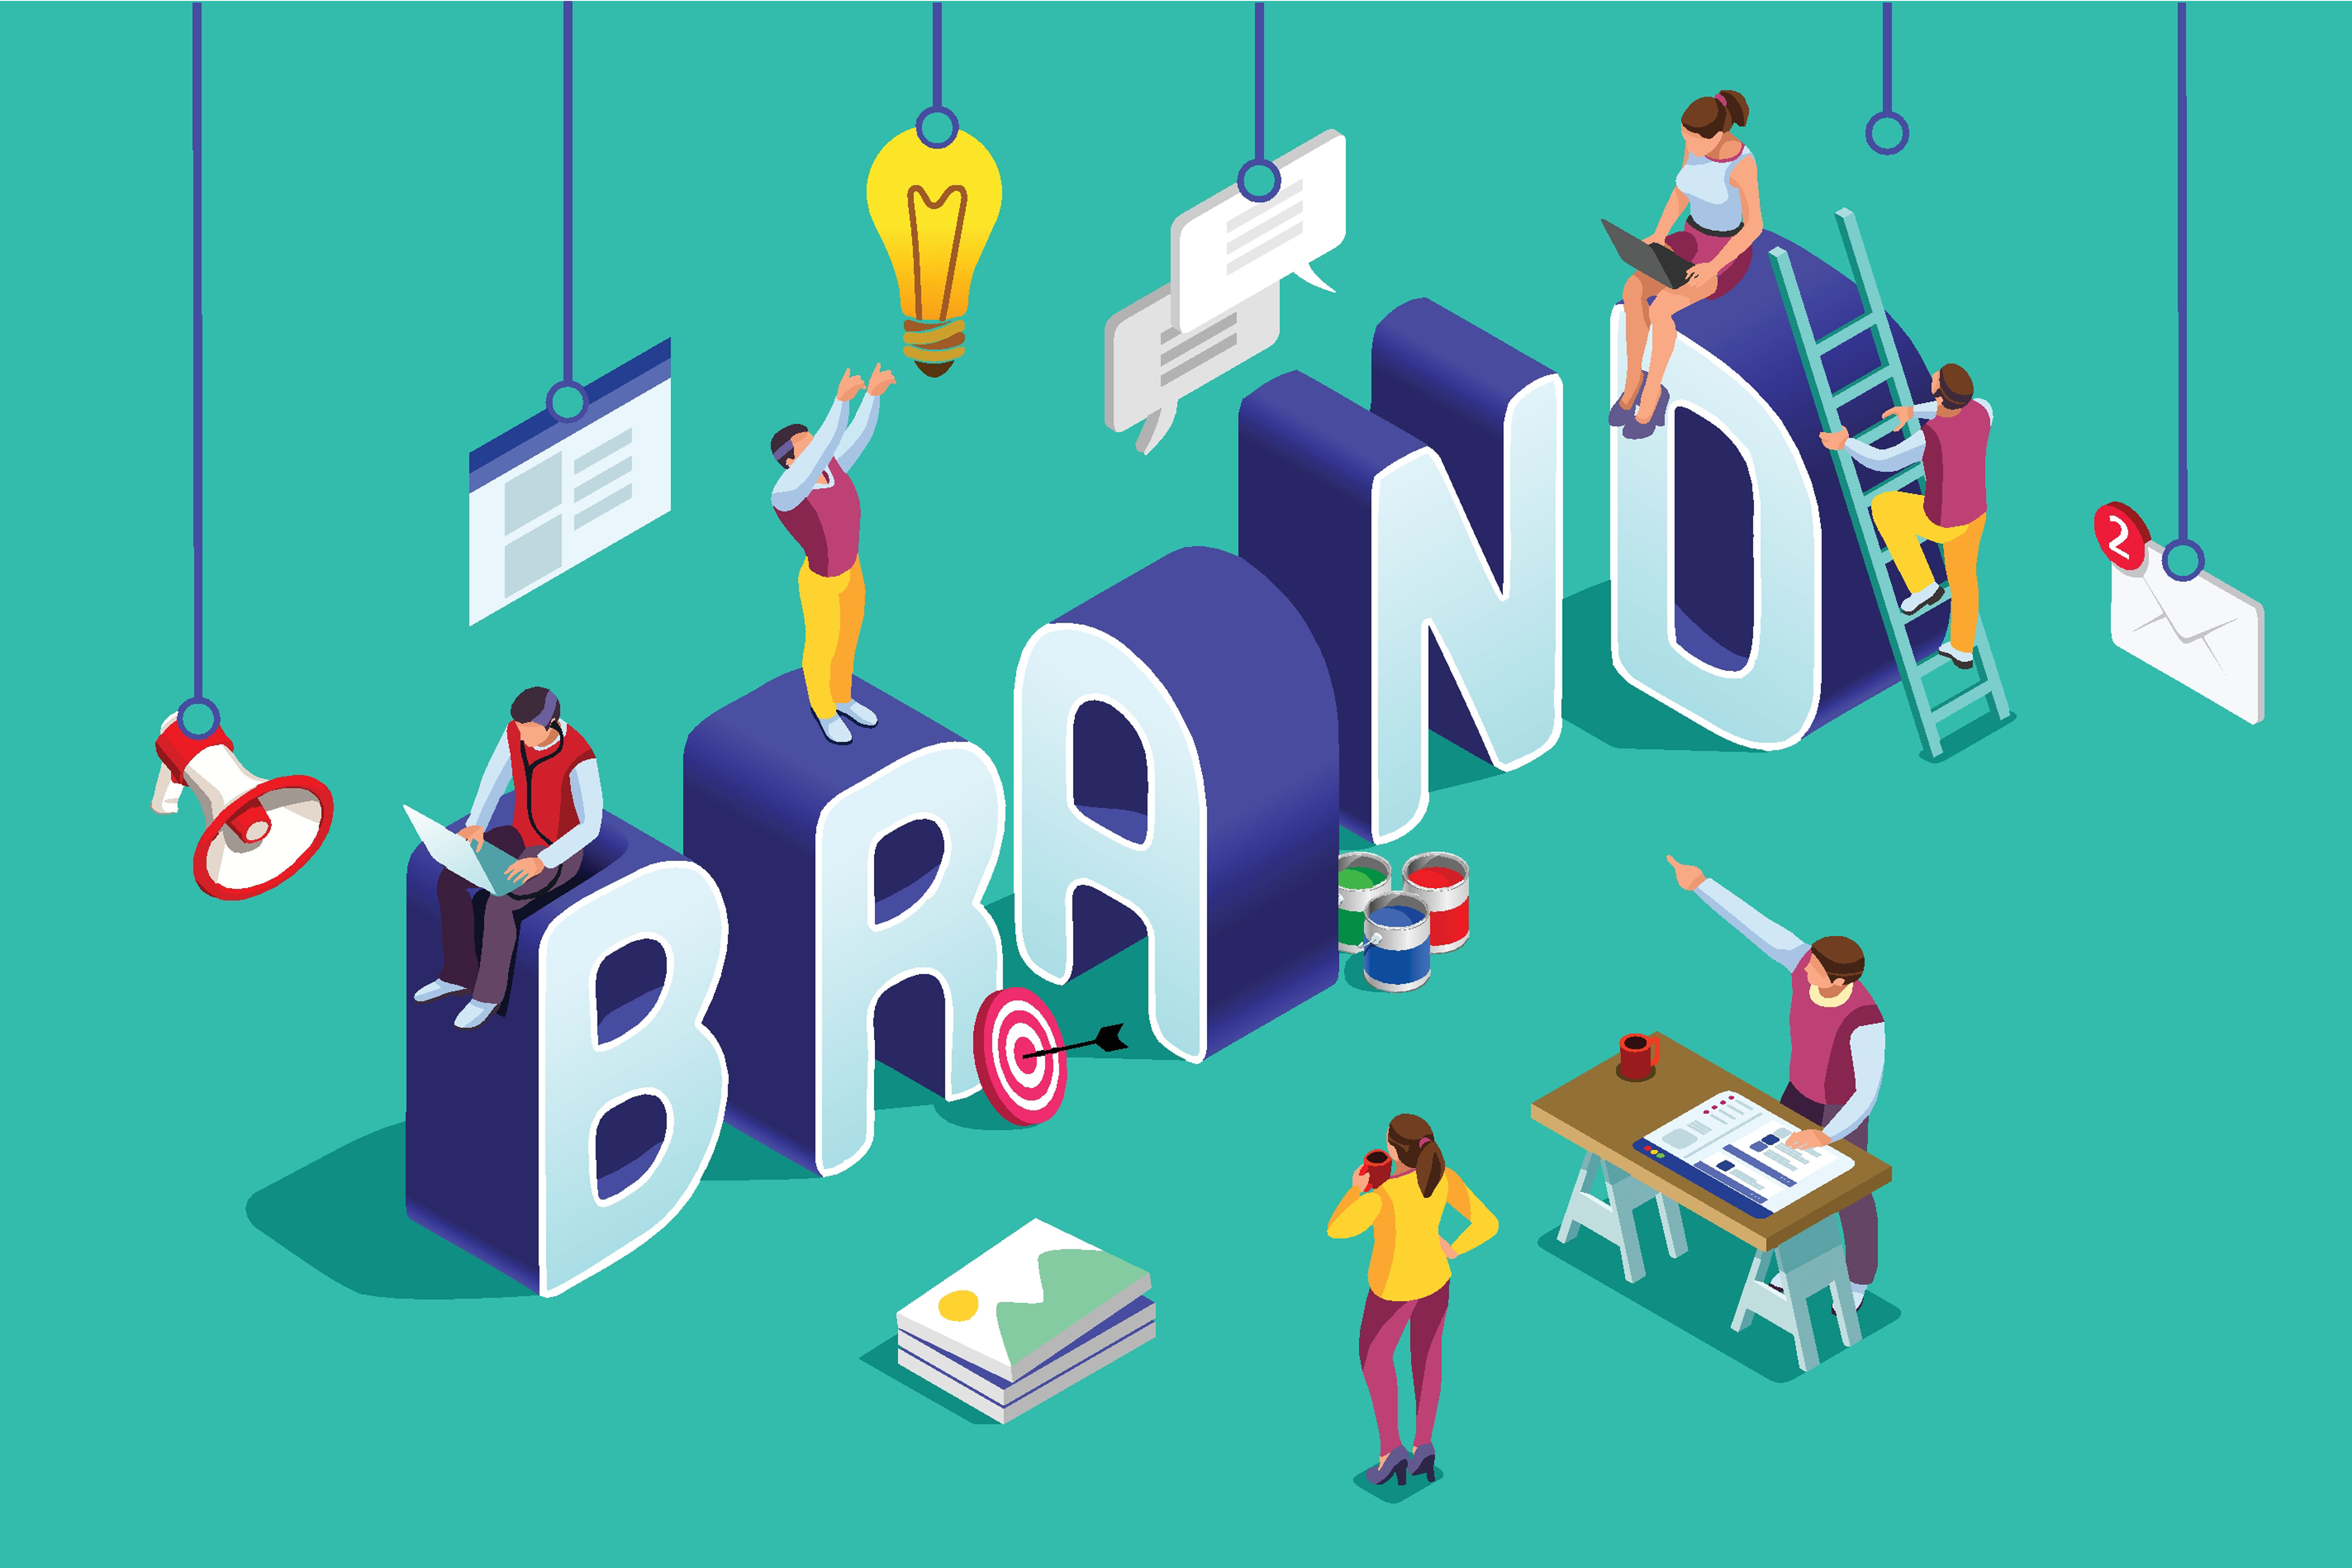 Live Stream BYOB: Build Your Online Brand on June 5th